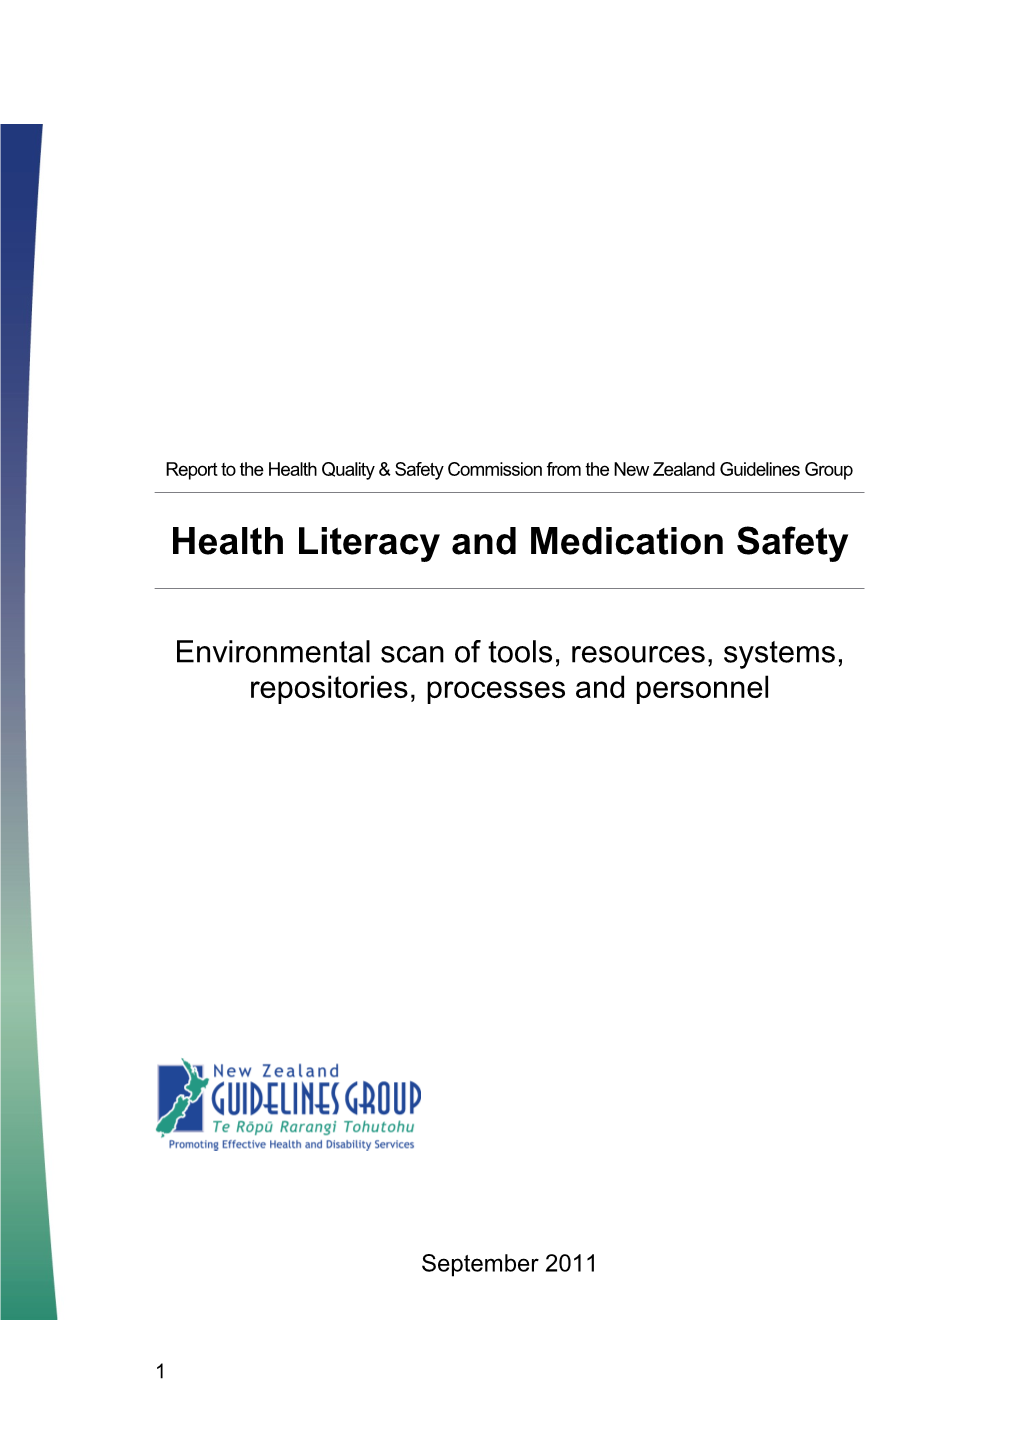 Health Literacy and Medication Safety